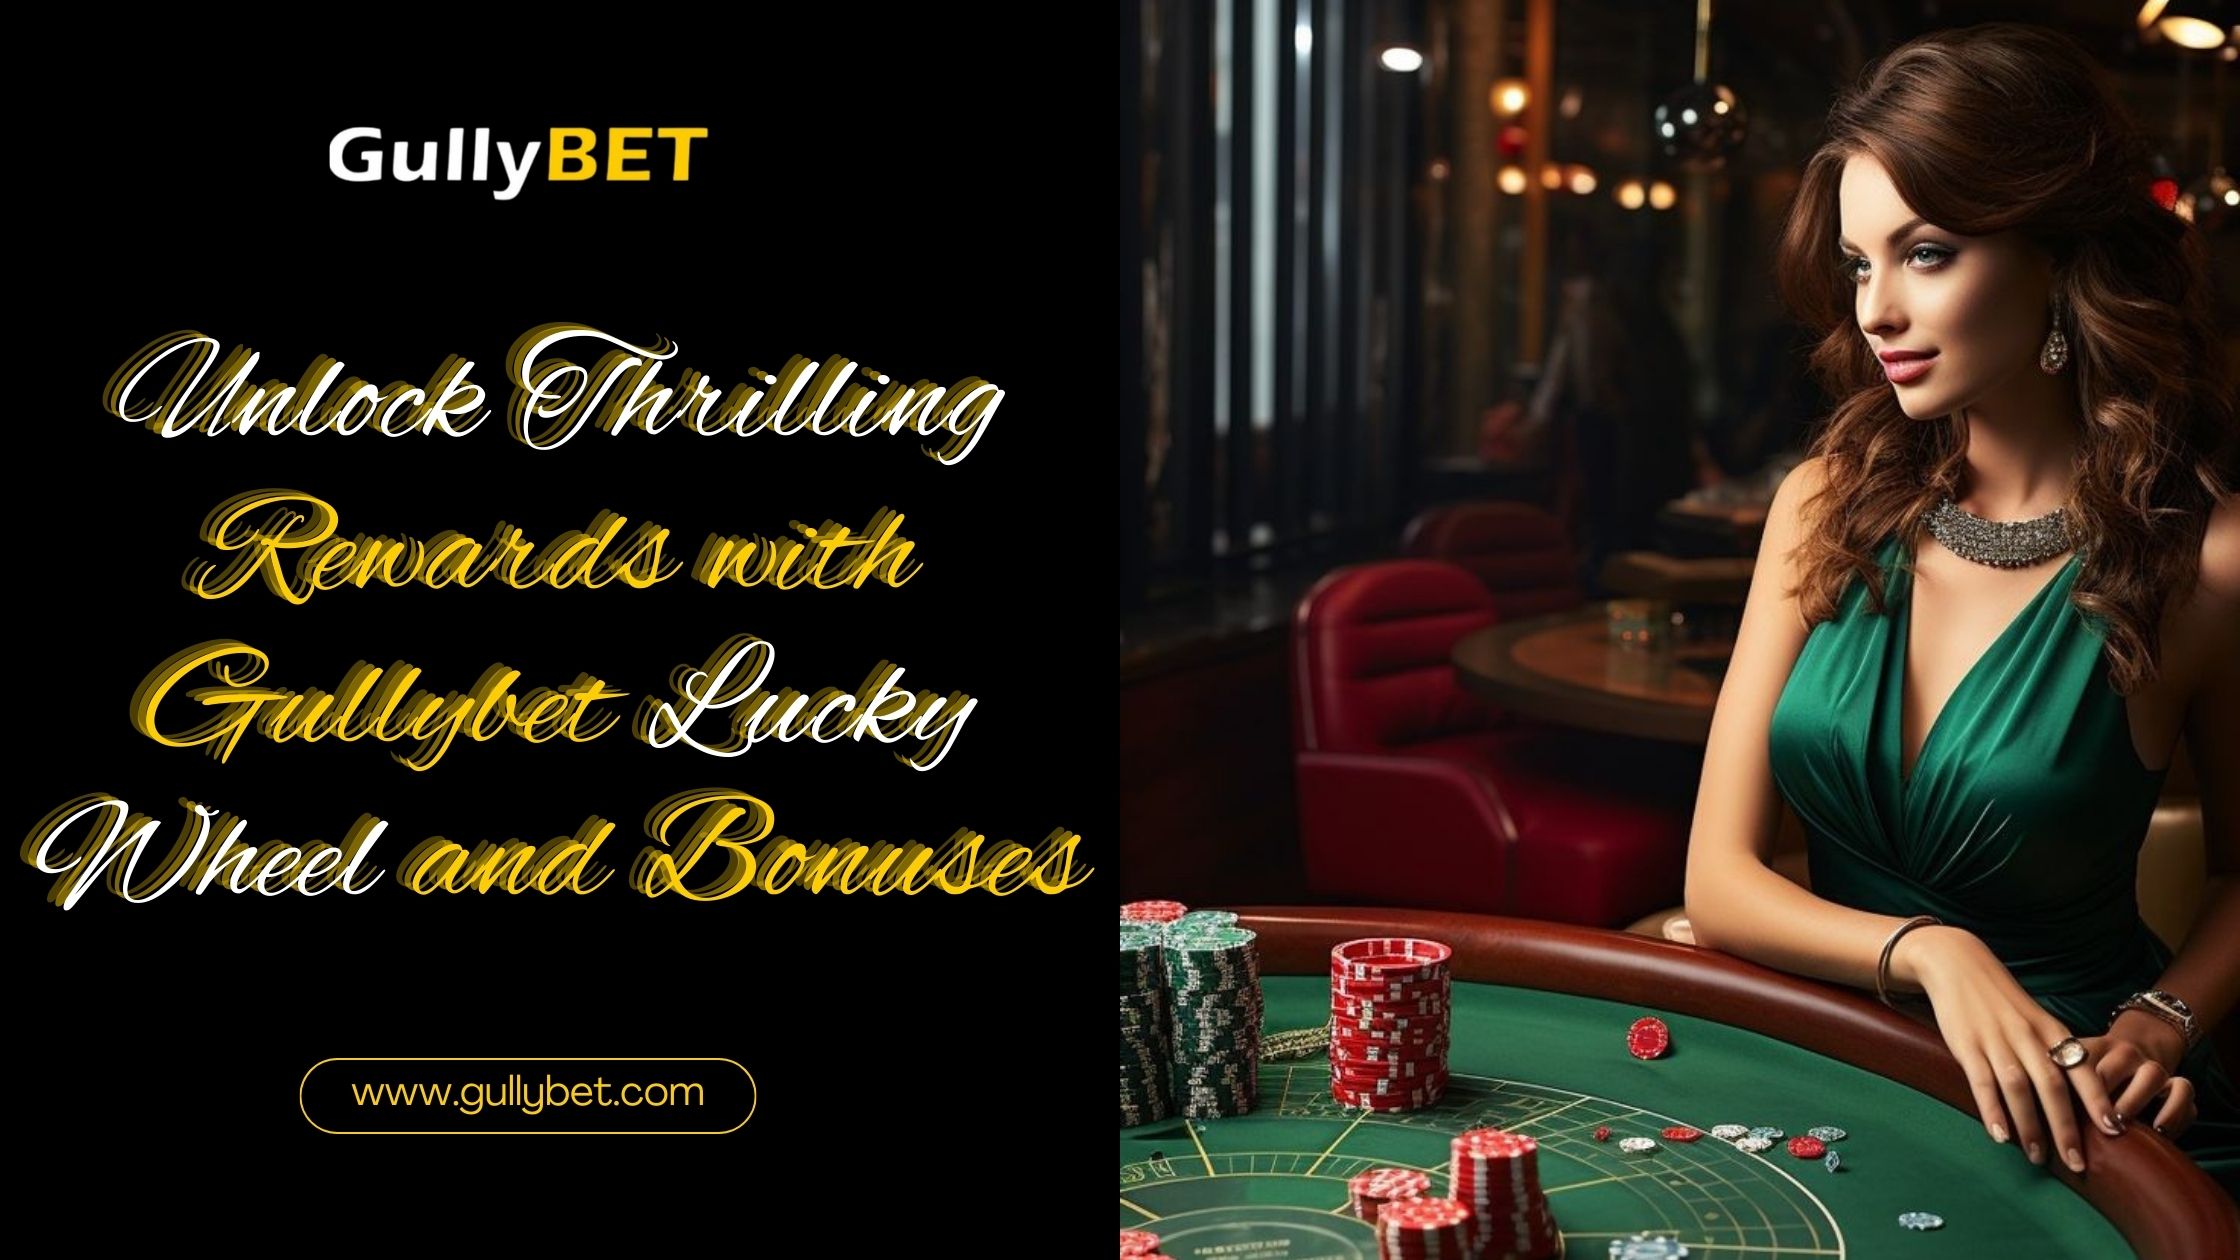 Unlock Thrilling Rewards with Gullybet Lucky Wheel and Bonuses